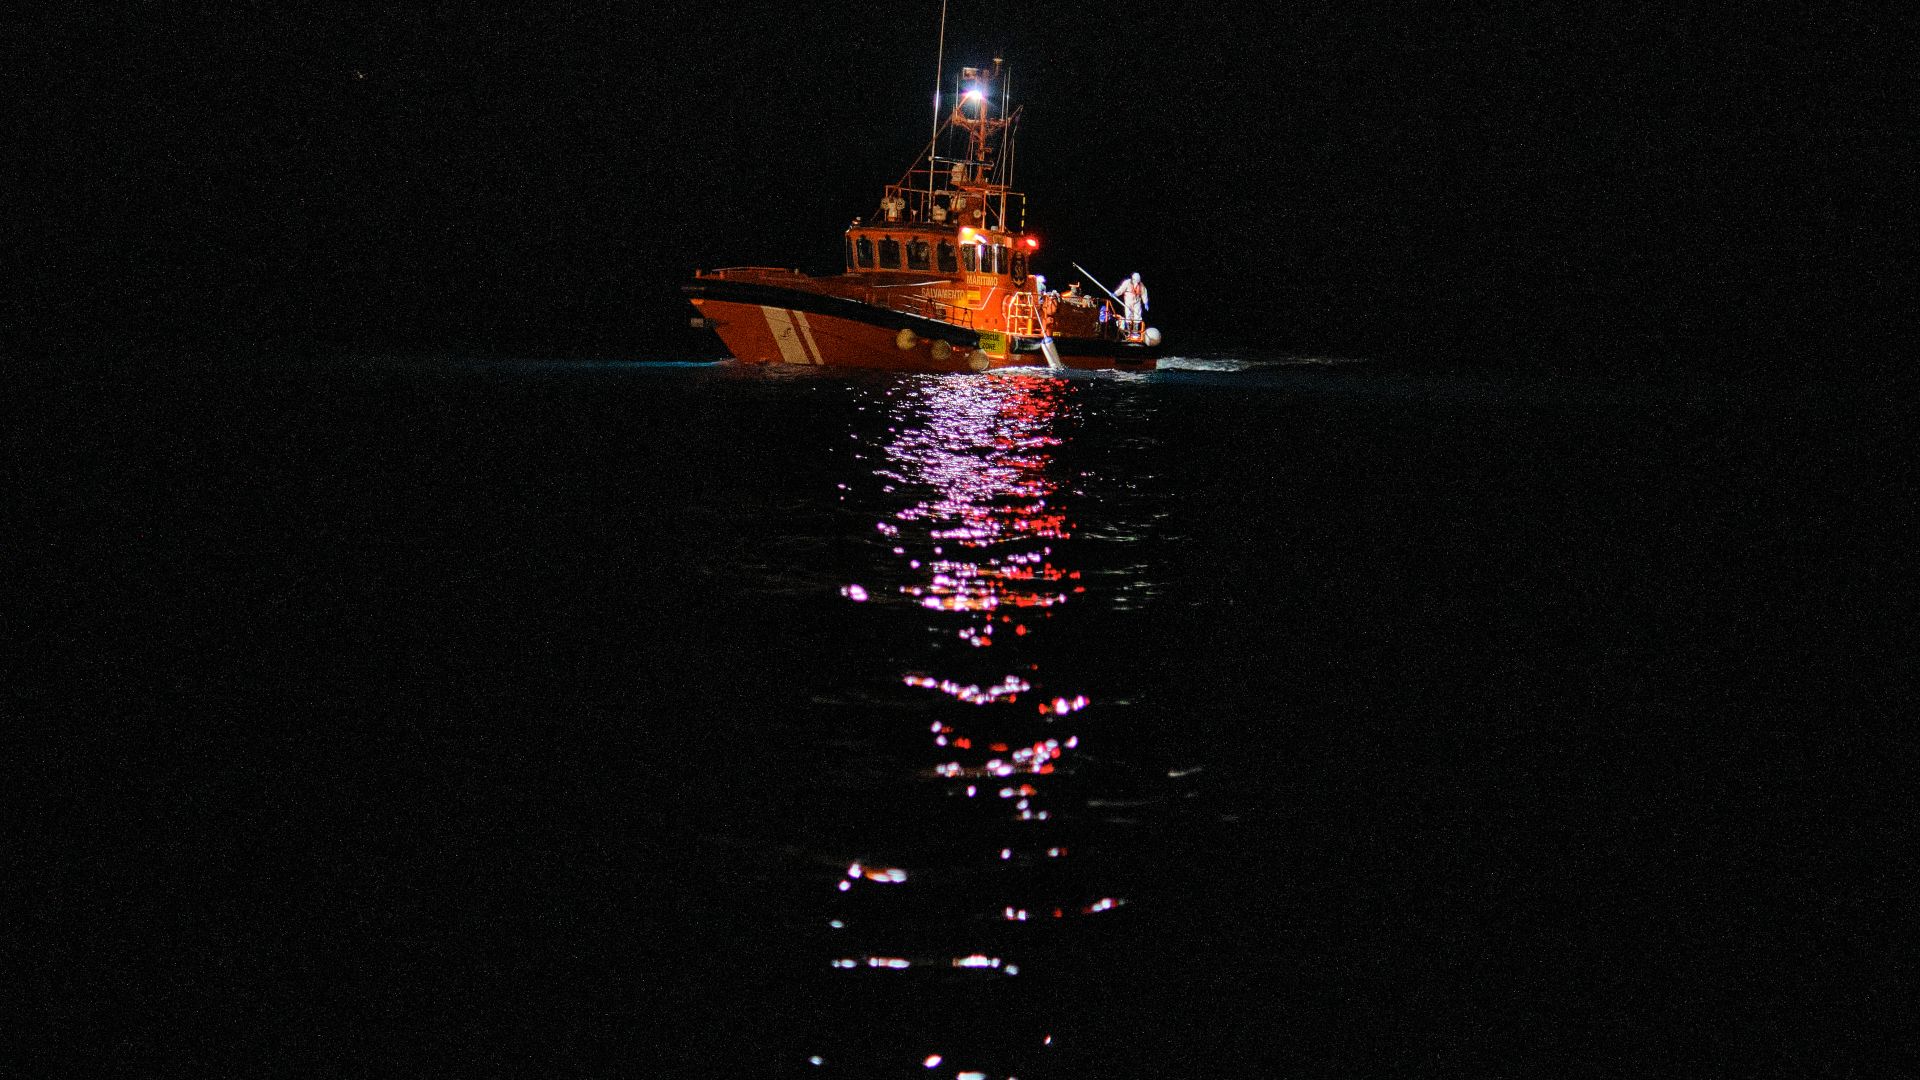 A photo of a Spanish search and rescue vessel in the dark.